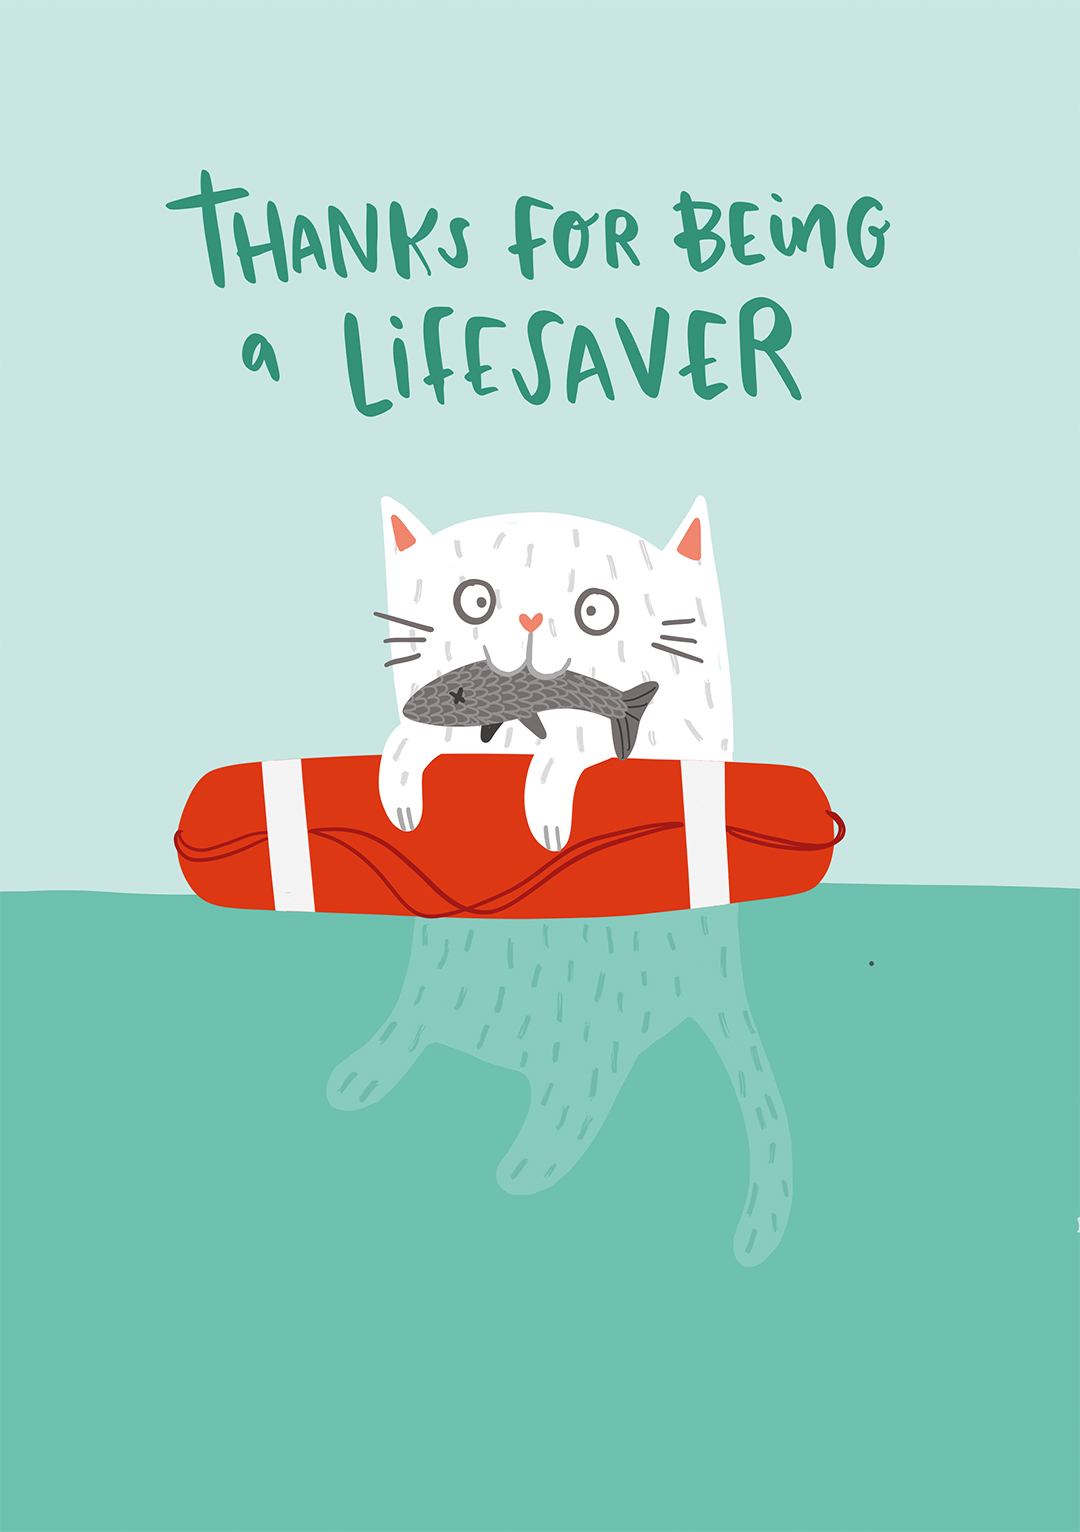 thanks for being a lifesaver greeting card